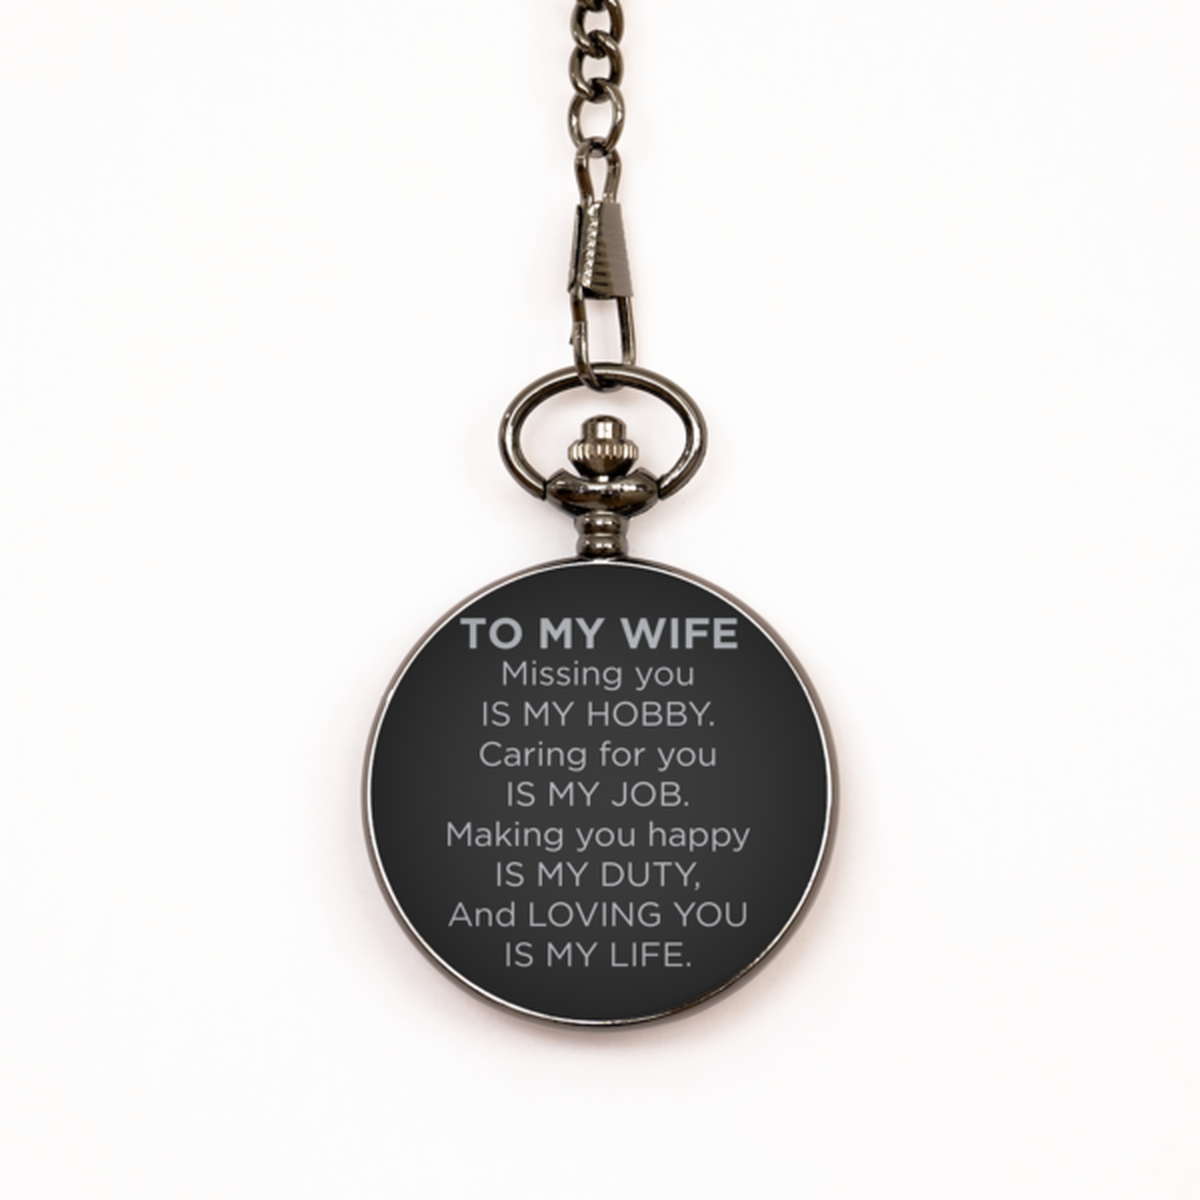 To My Wife Black Pocket Watch, Loving You Is My Life, Birthday Gifts For Wife From Husband, Valentines Gifts For Women